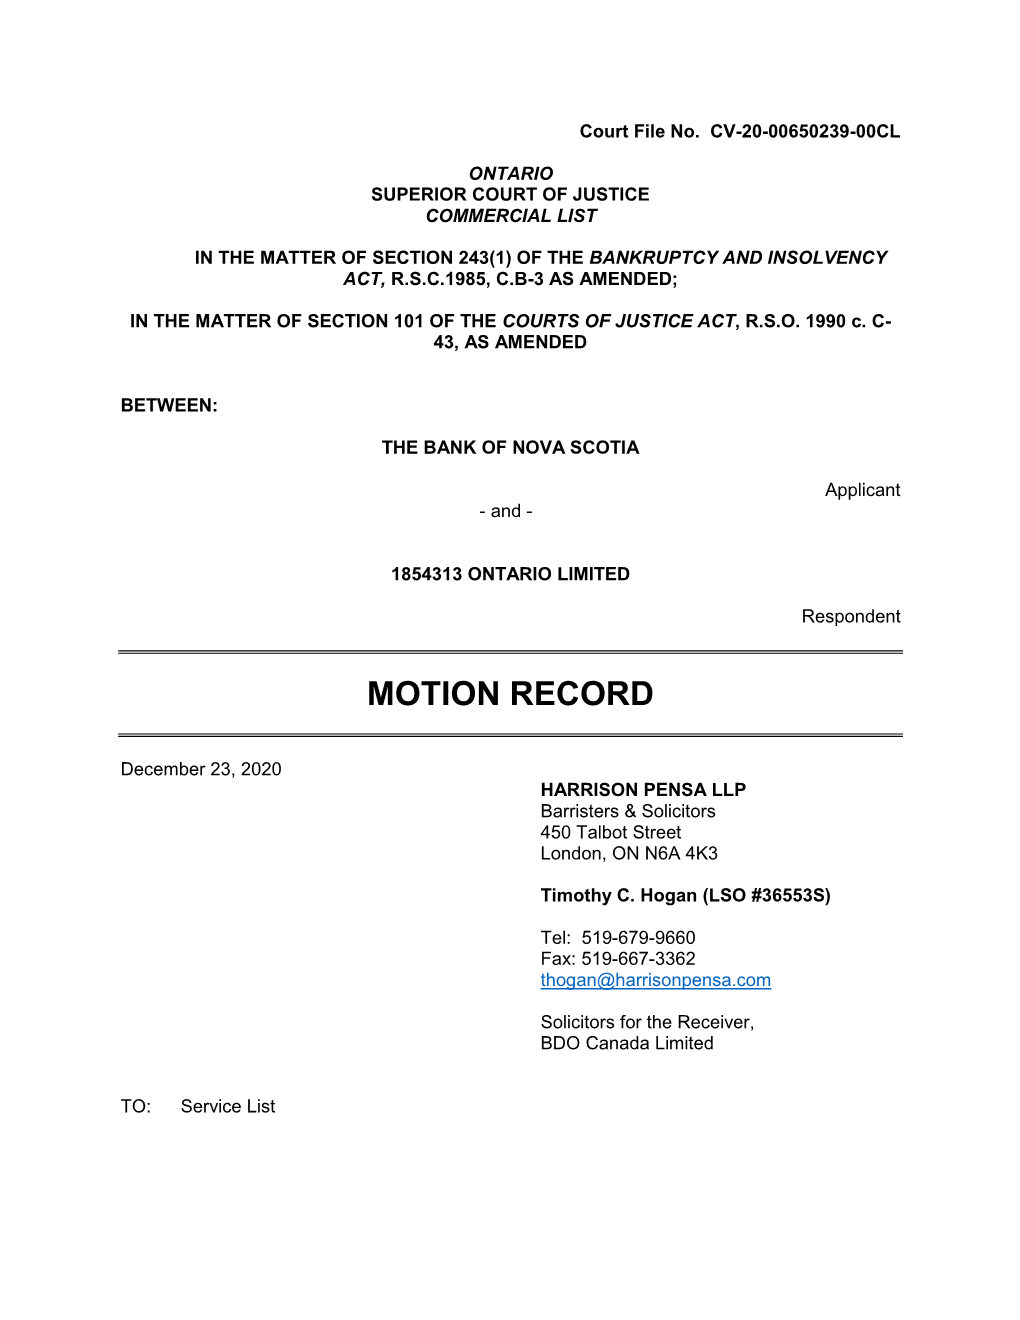 Motion Record of the Receiver Dated Dec 23, 2020